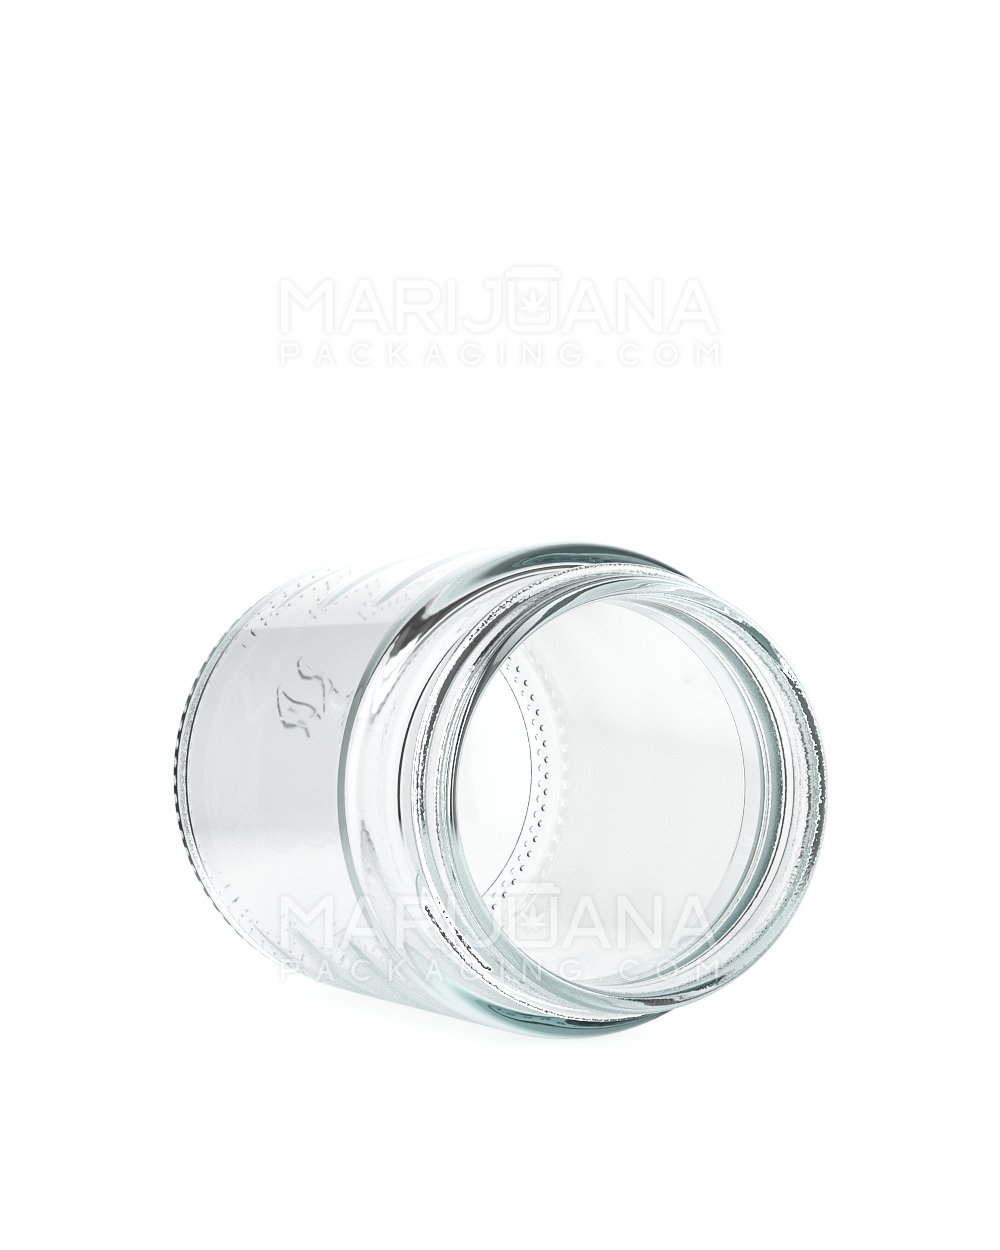 Straight Sided Clear Glass Jars with White Cap | 53mm - 4oz - 120 Count - 4